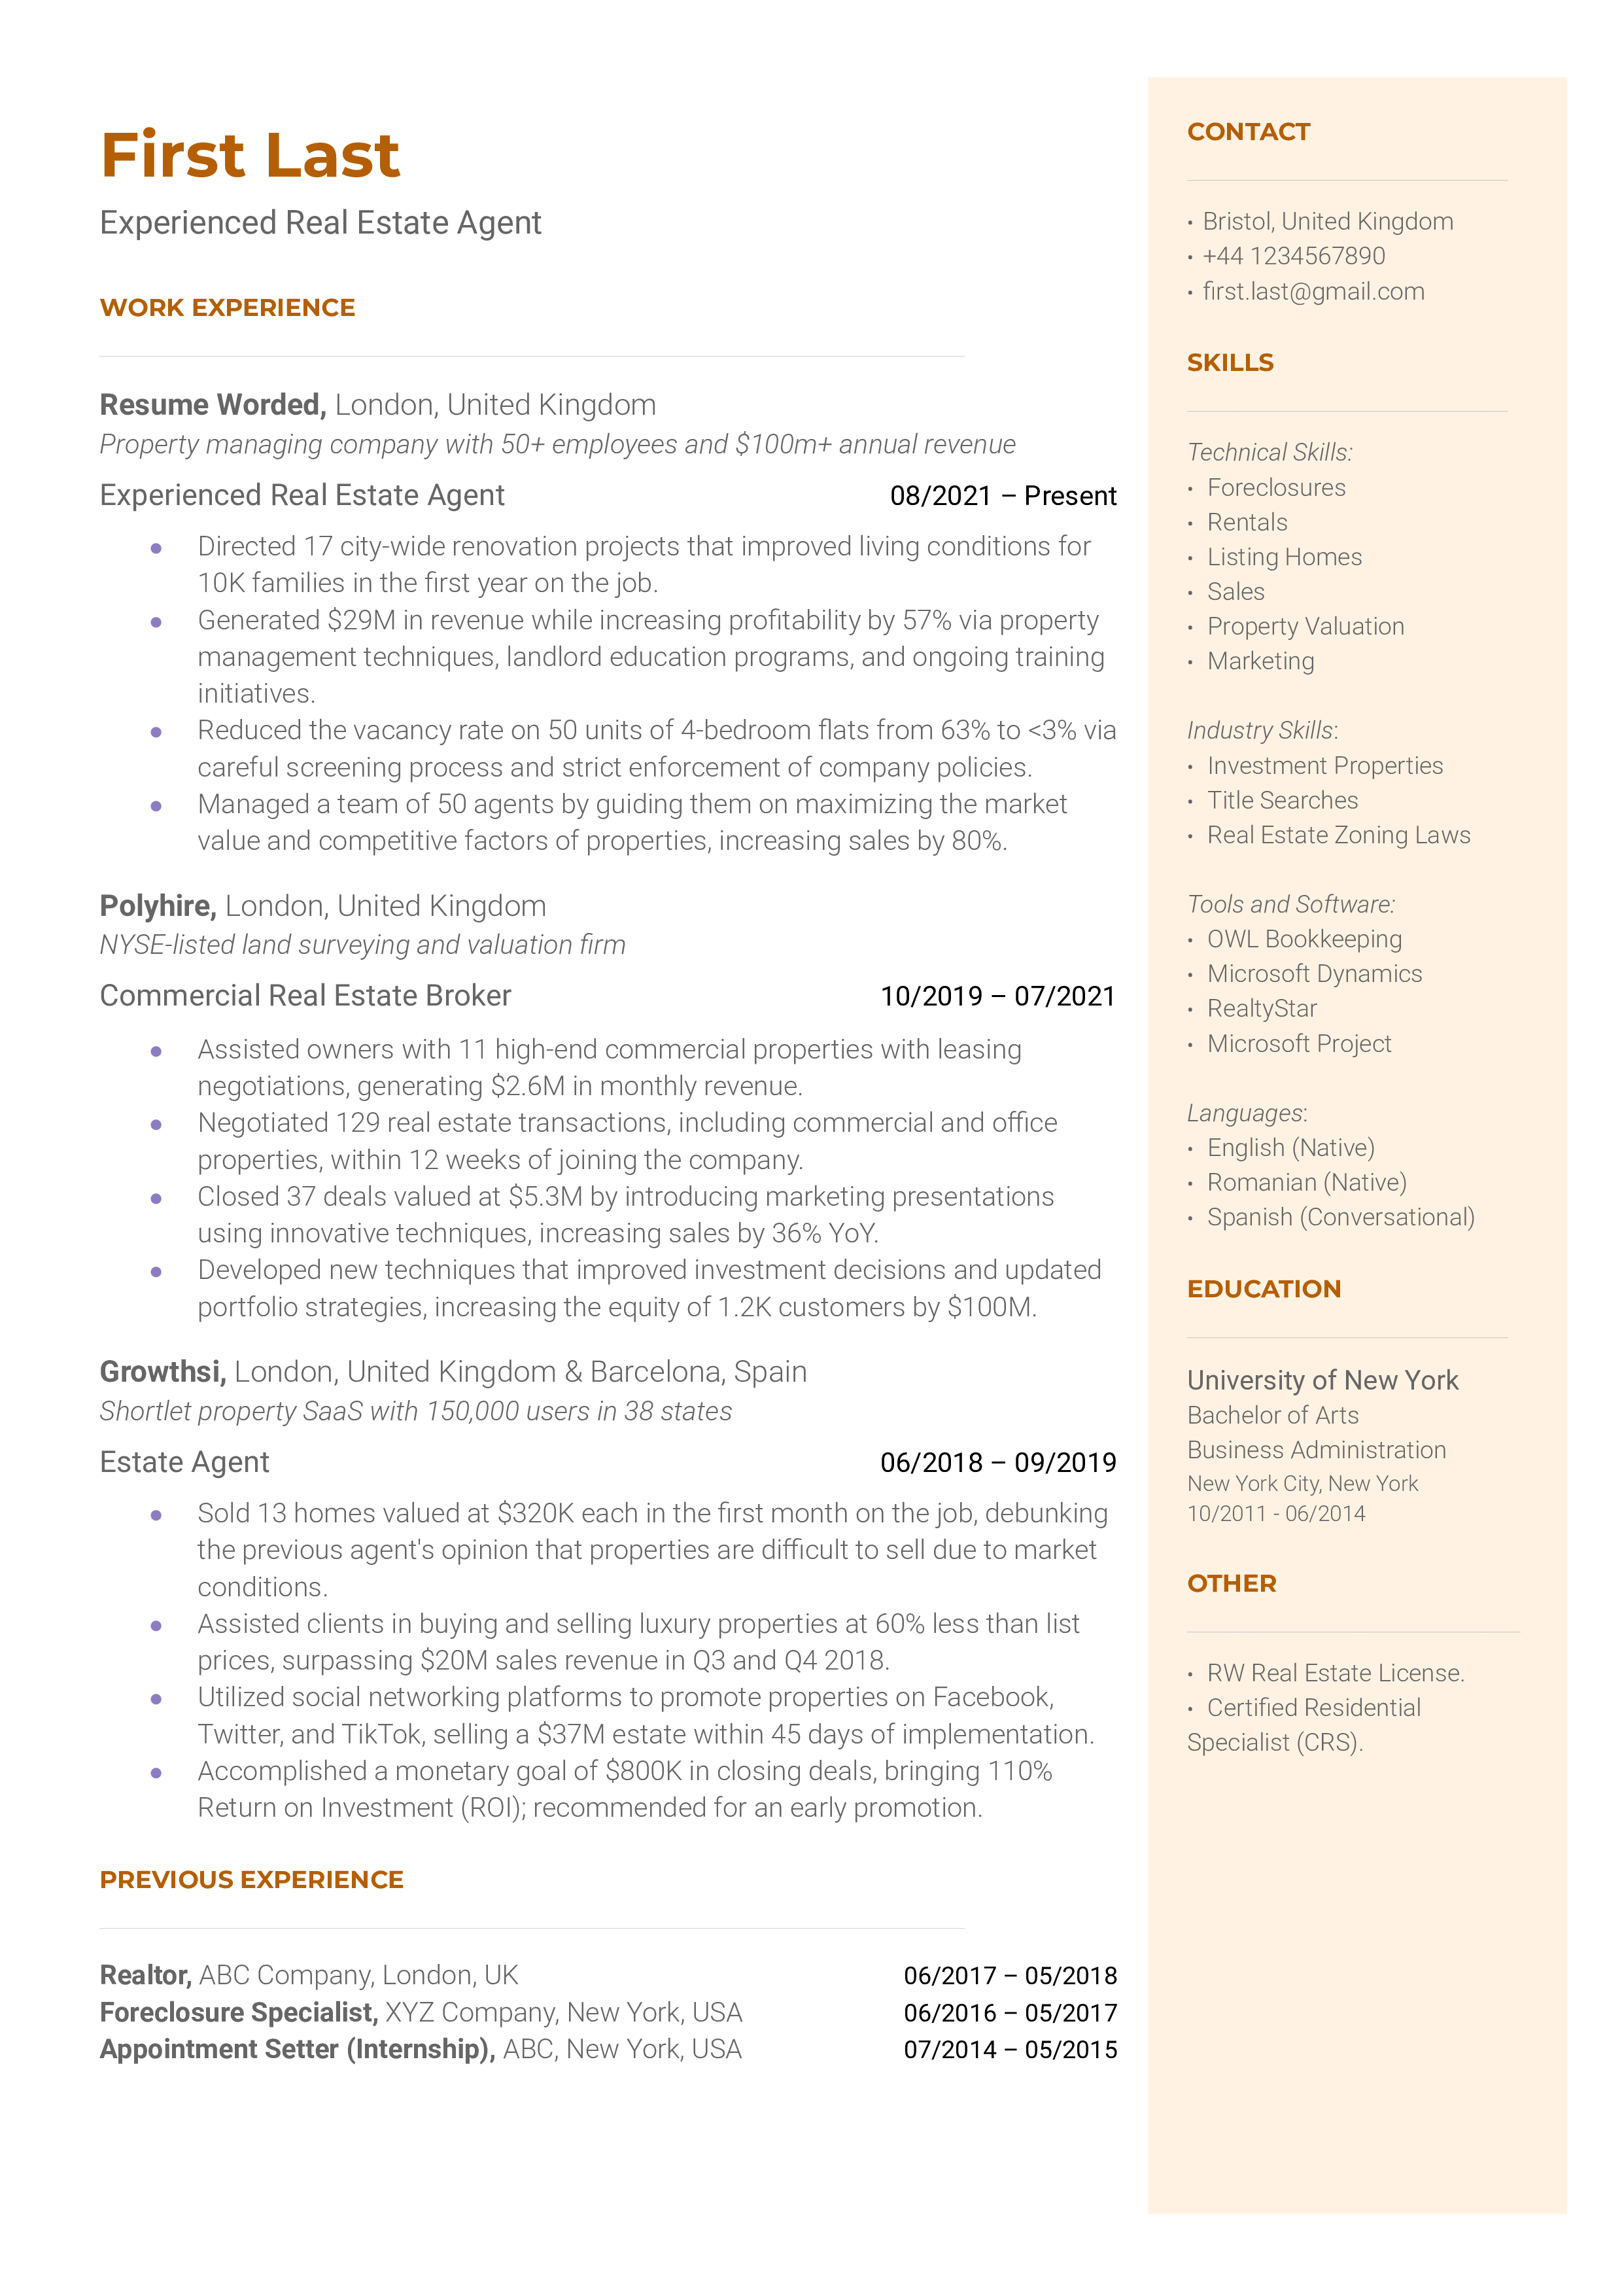 Experienced Real Estate Agent Resume Sample